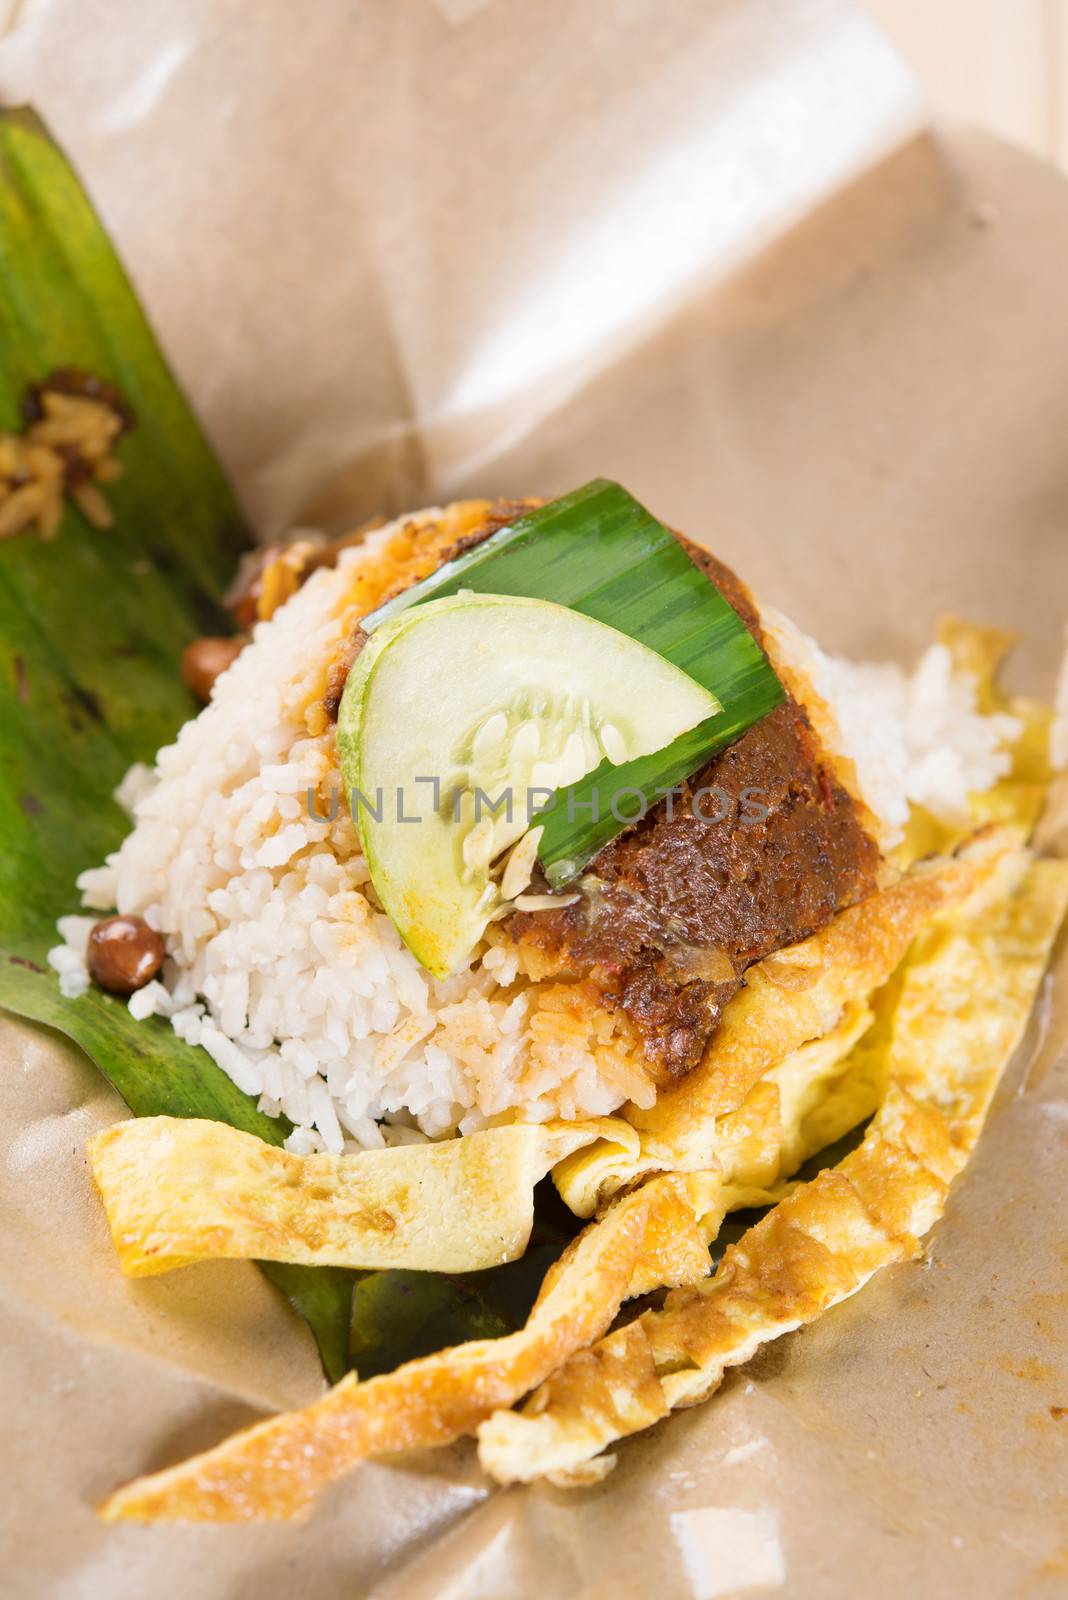 A pack of nasi lemak (Malaysia National Dish) on dining table ready to eat.